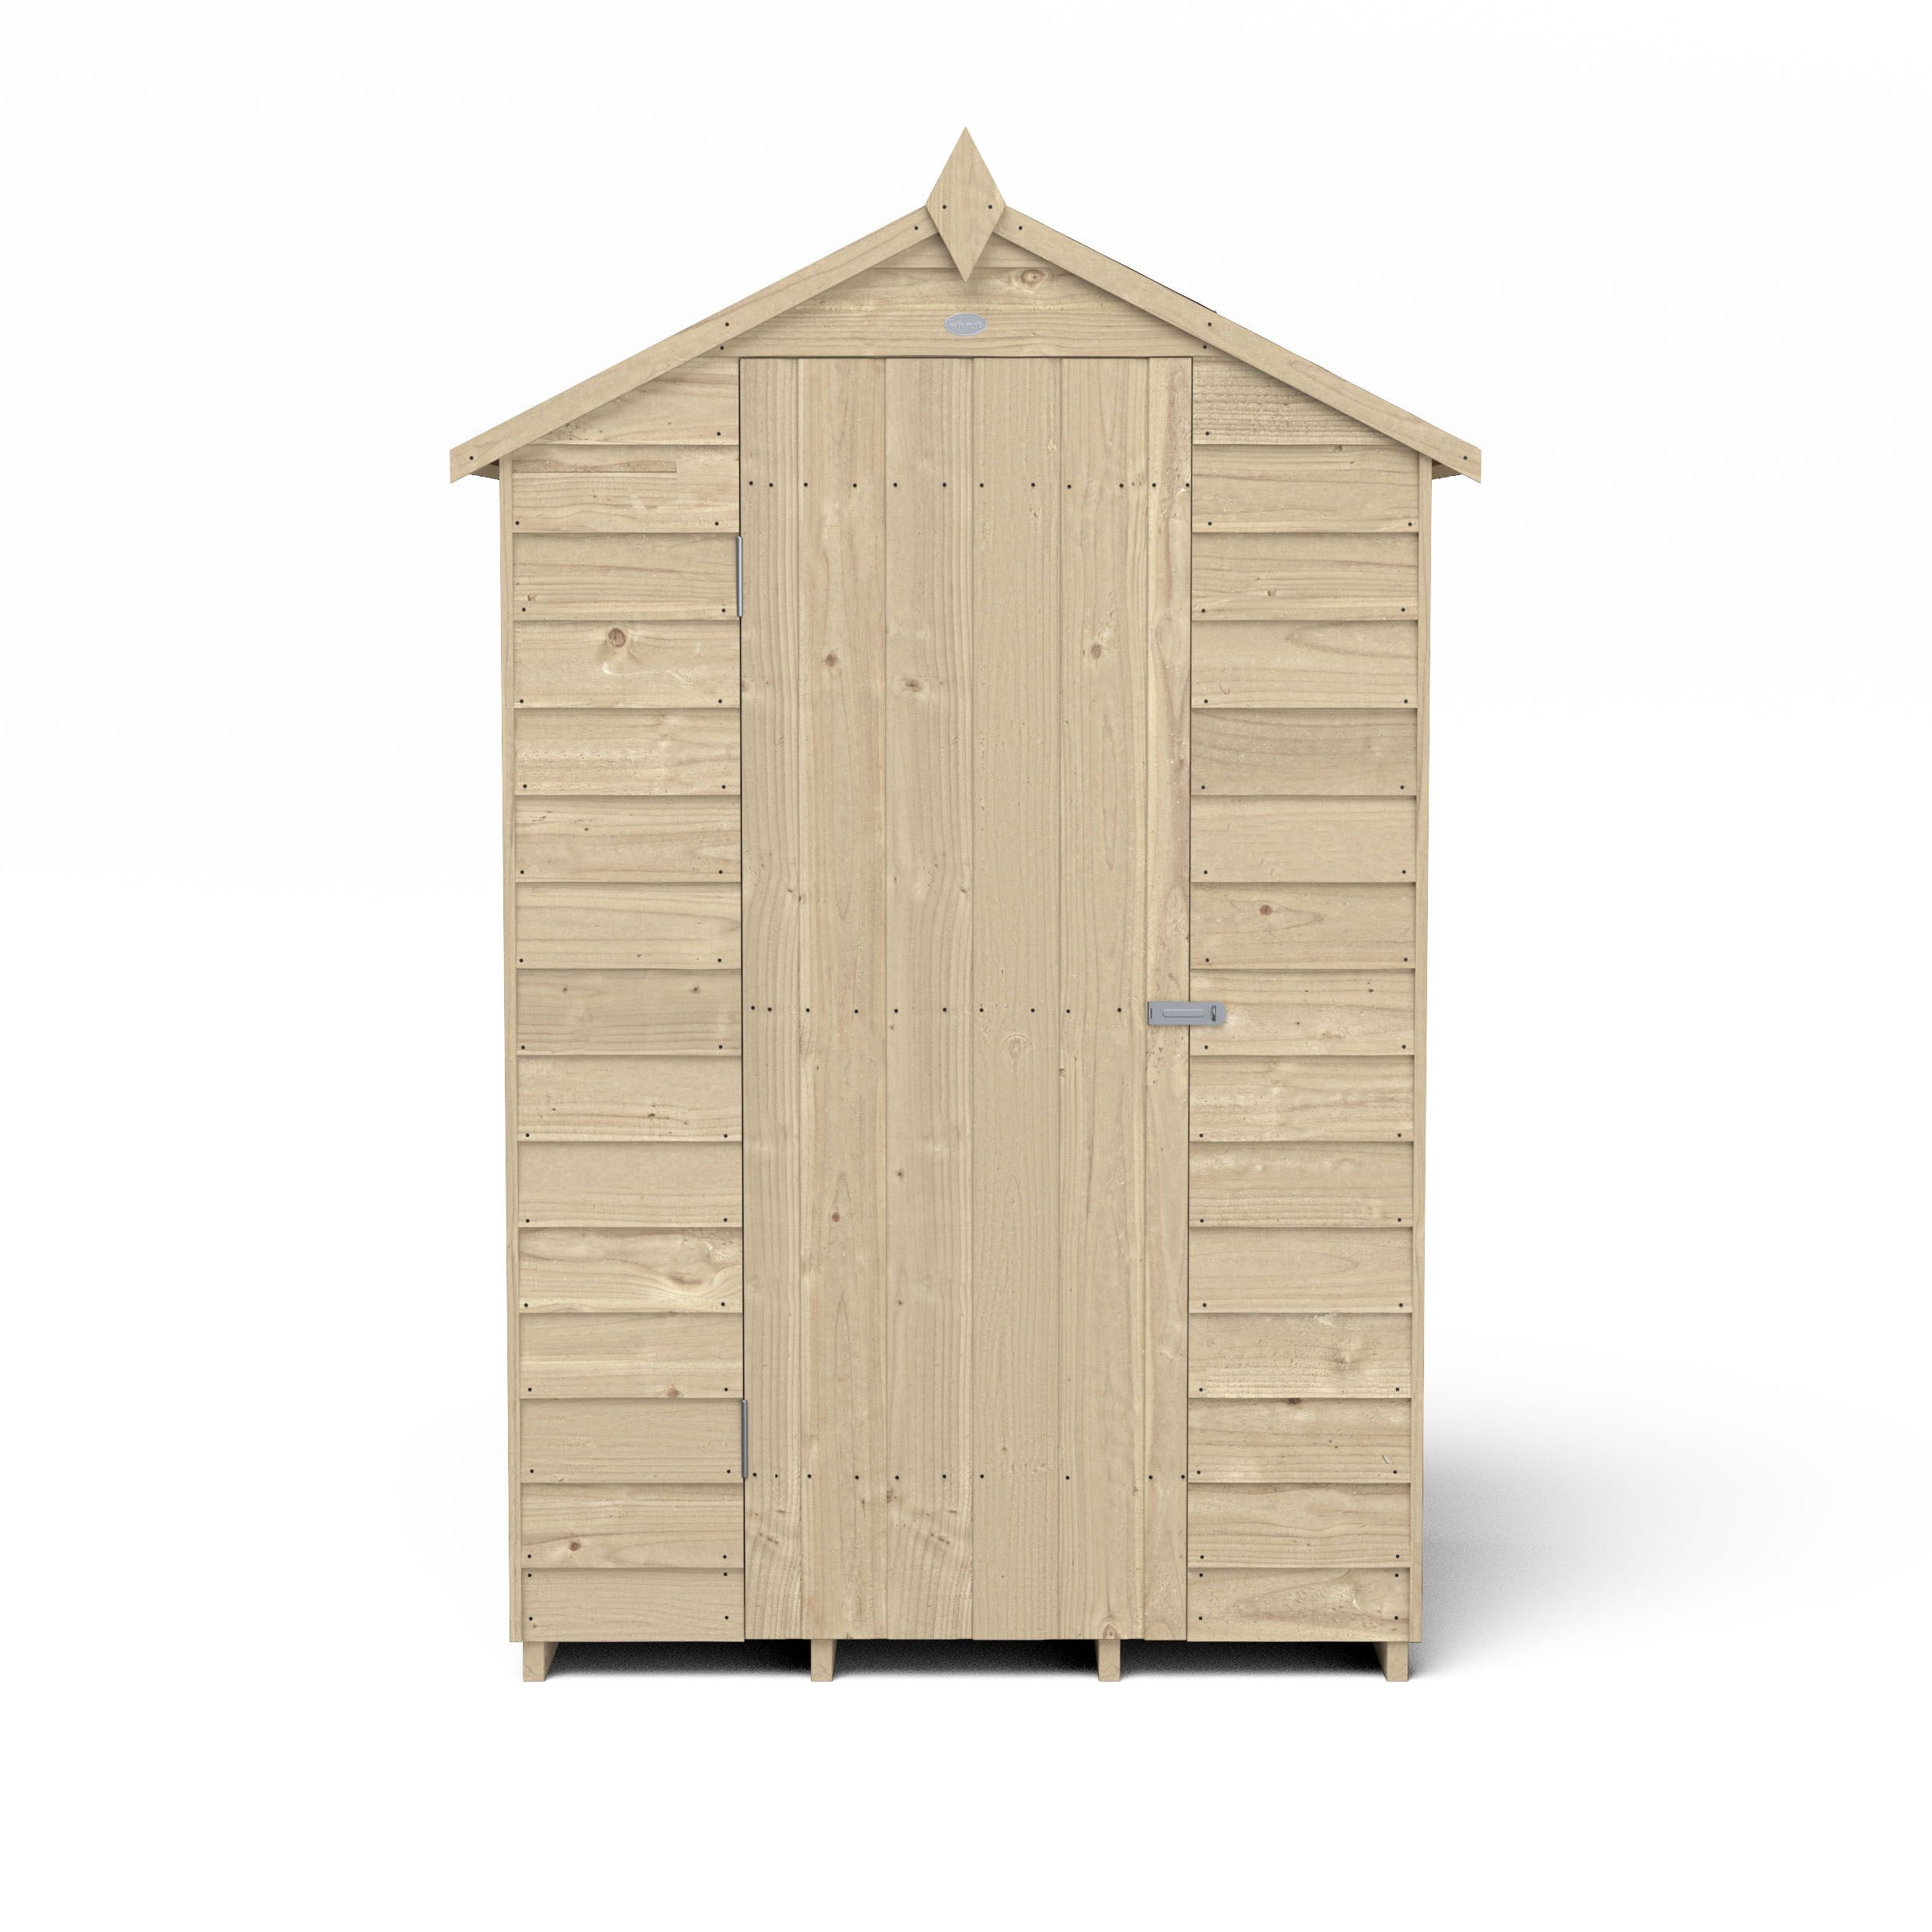 Forest Garden Overlap 4x3 ft Apex Wooden Shed with floor (Base included) - Assembly service included